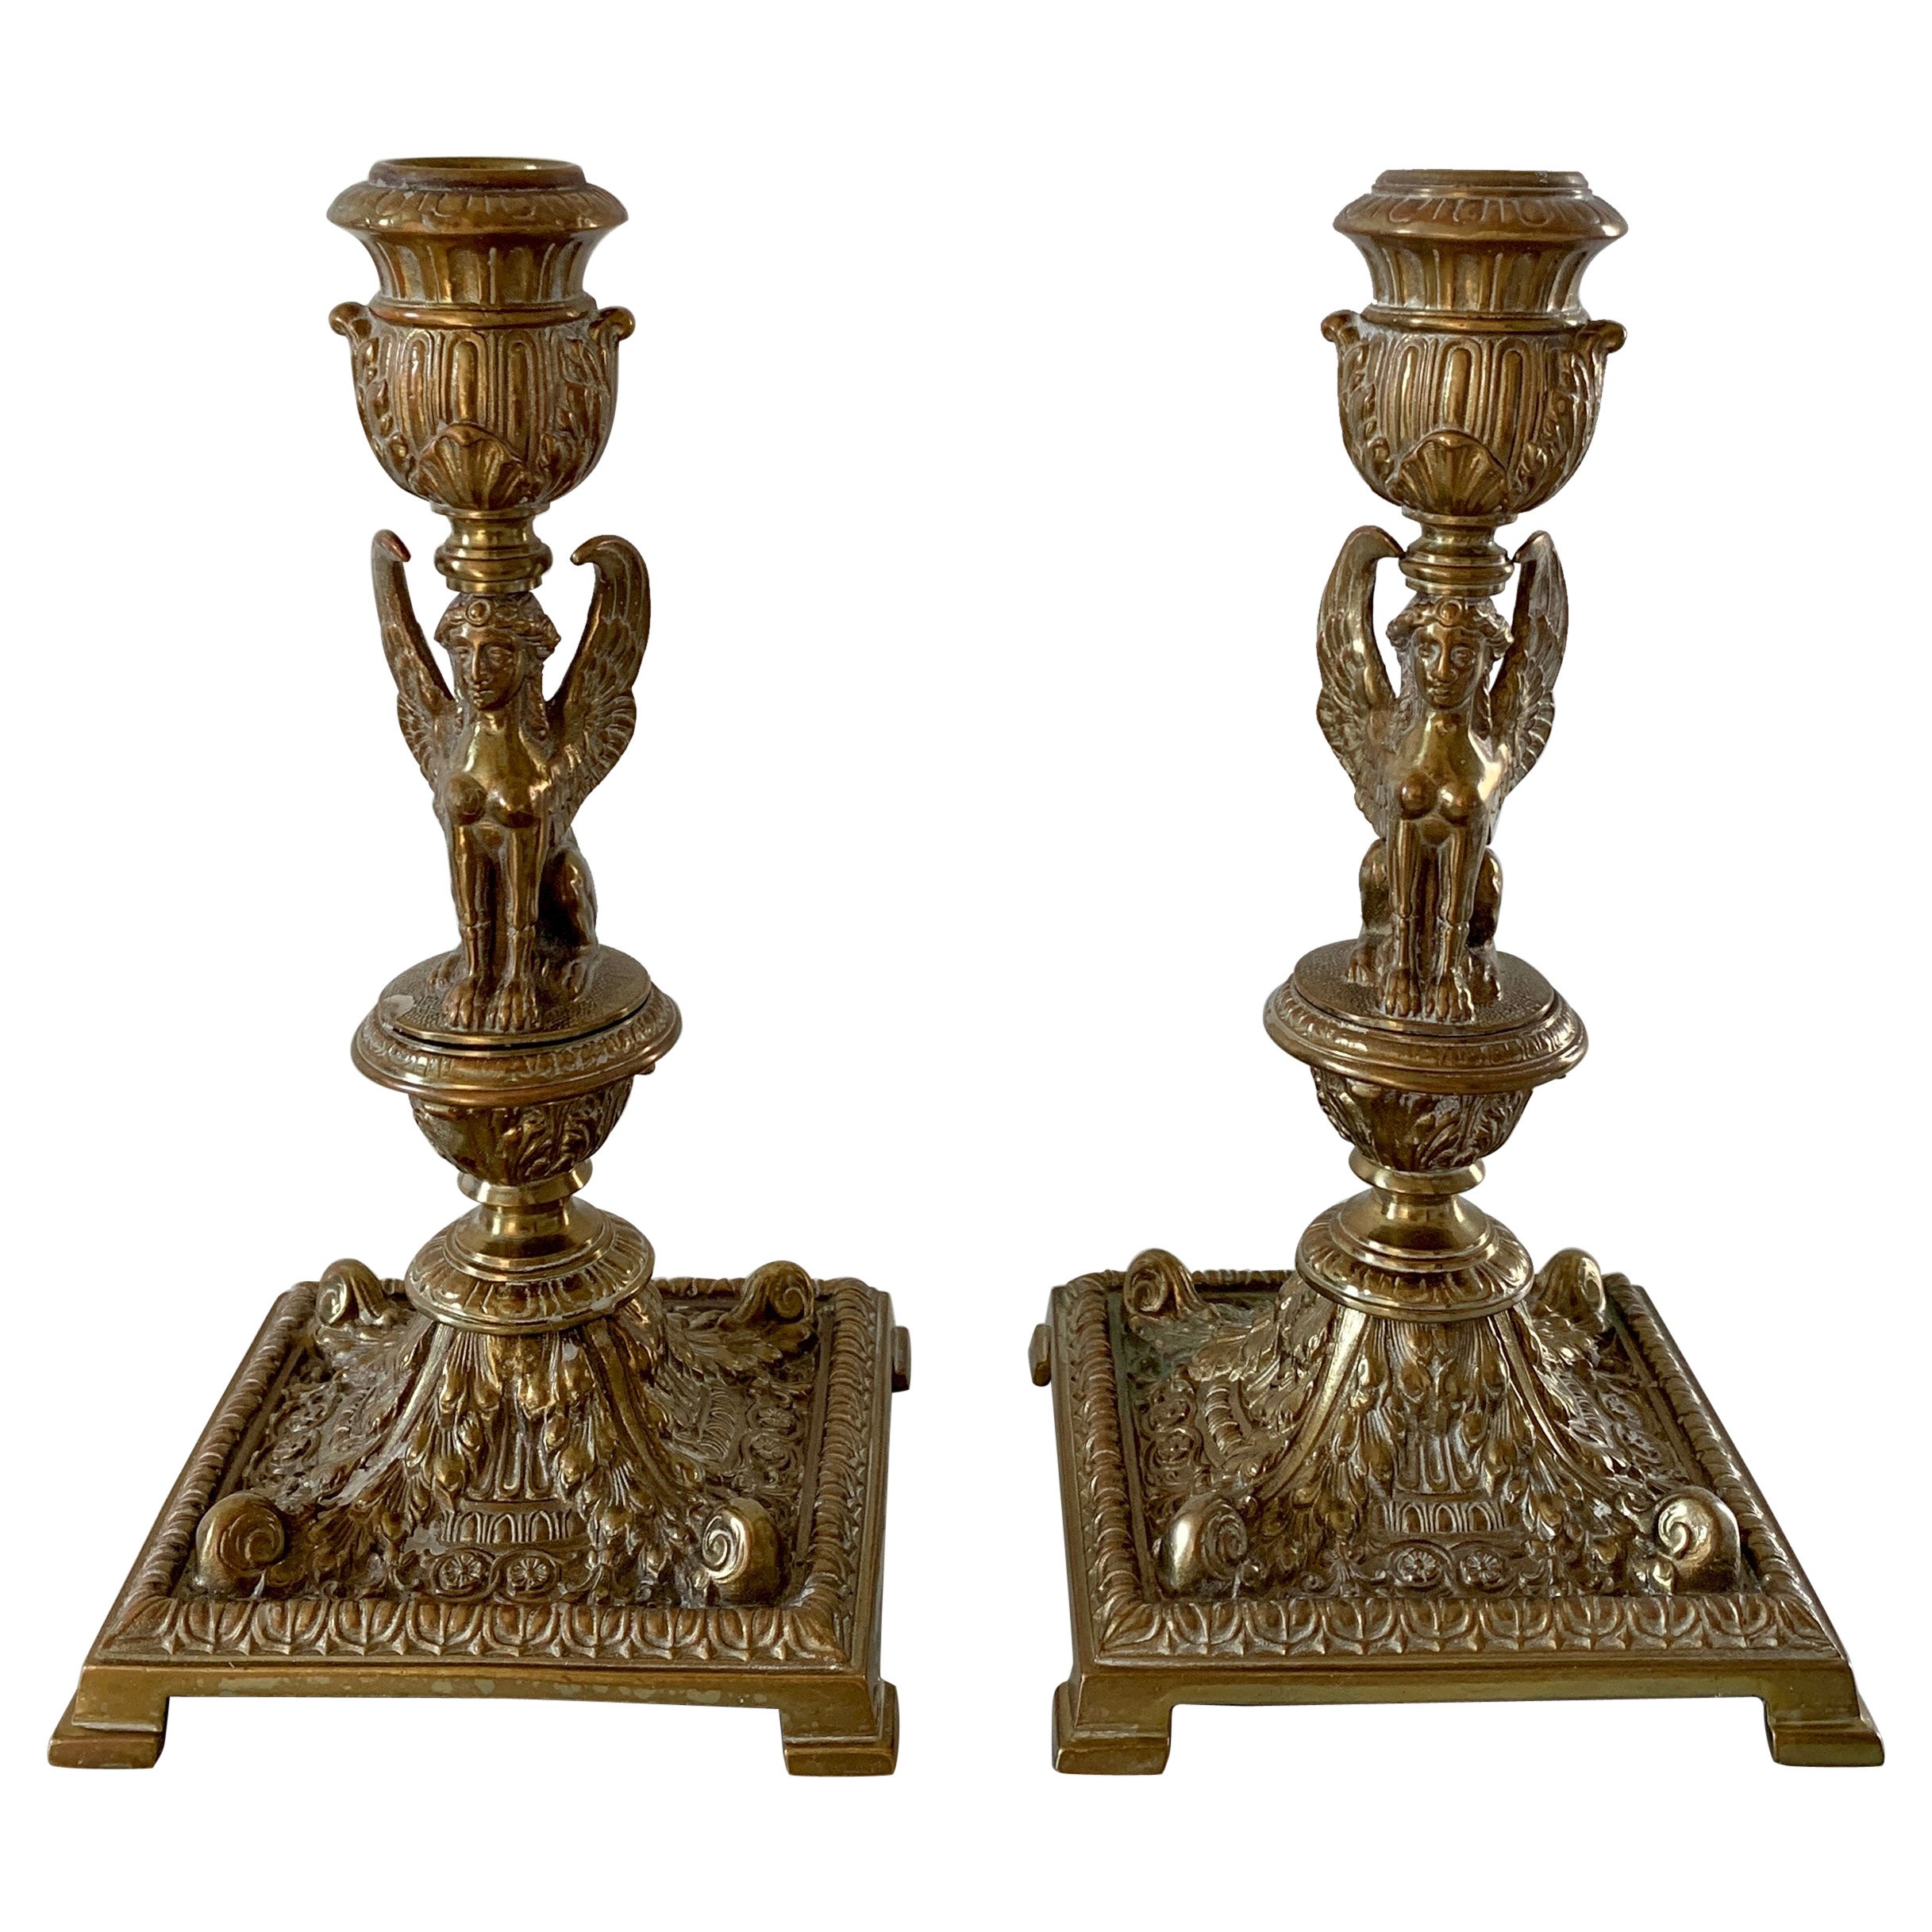 19th Century Egyptian Revival Gilt Bronze Sphinx Candlestick Holders, Pair For Sale